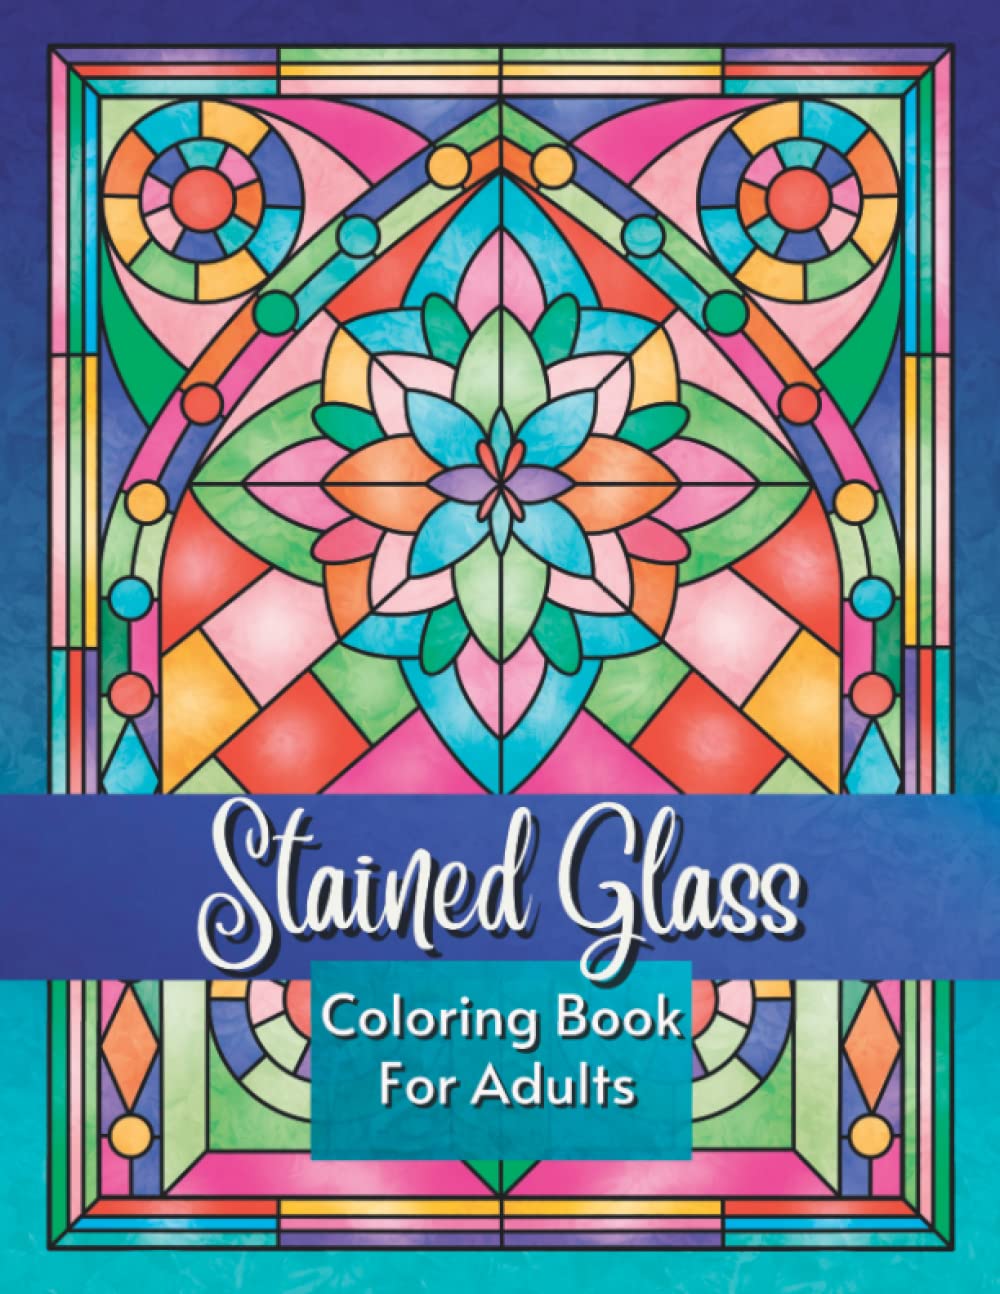 Stained glass coloring book for adults large print designs with flowers birds butterflies patterns and window motifs for stress relieving and relaxation by ora dean